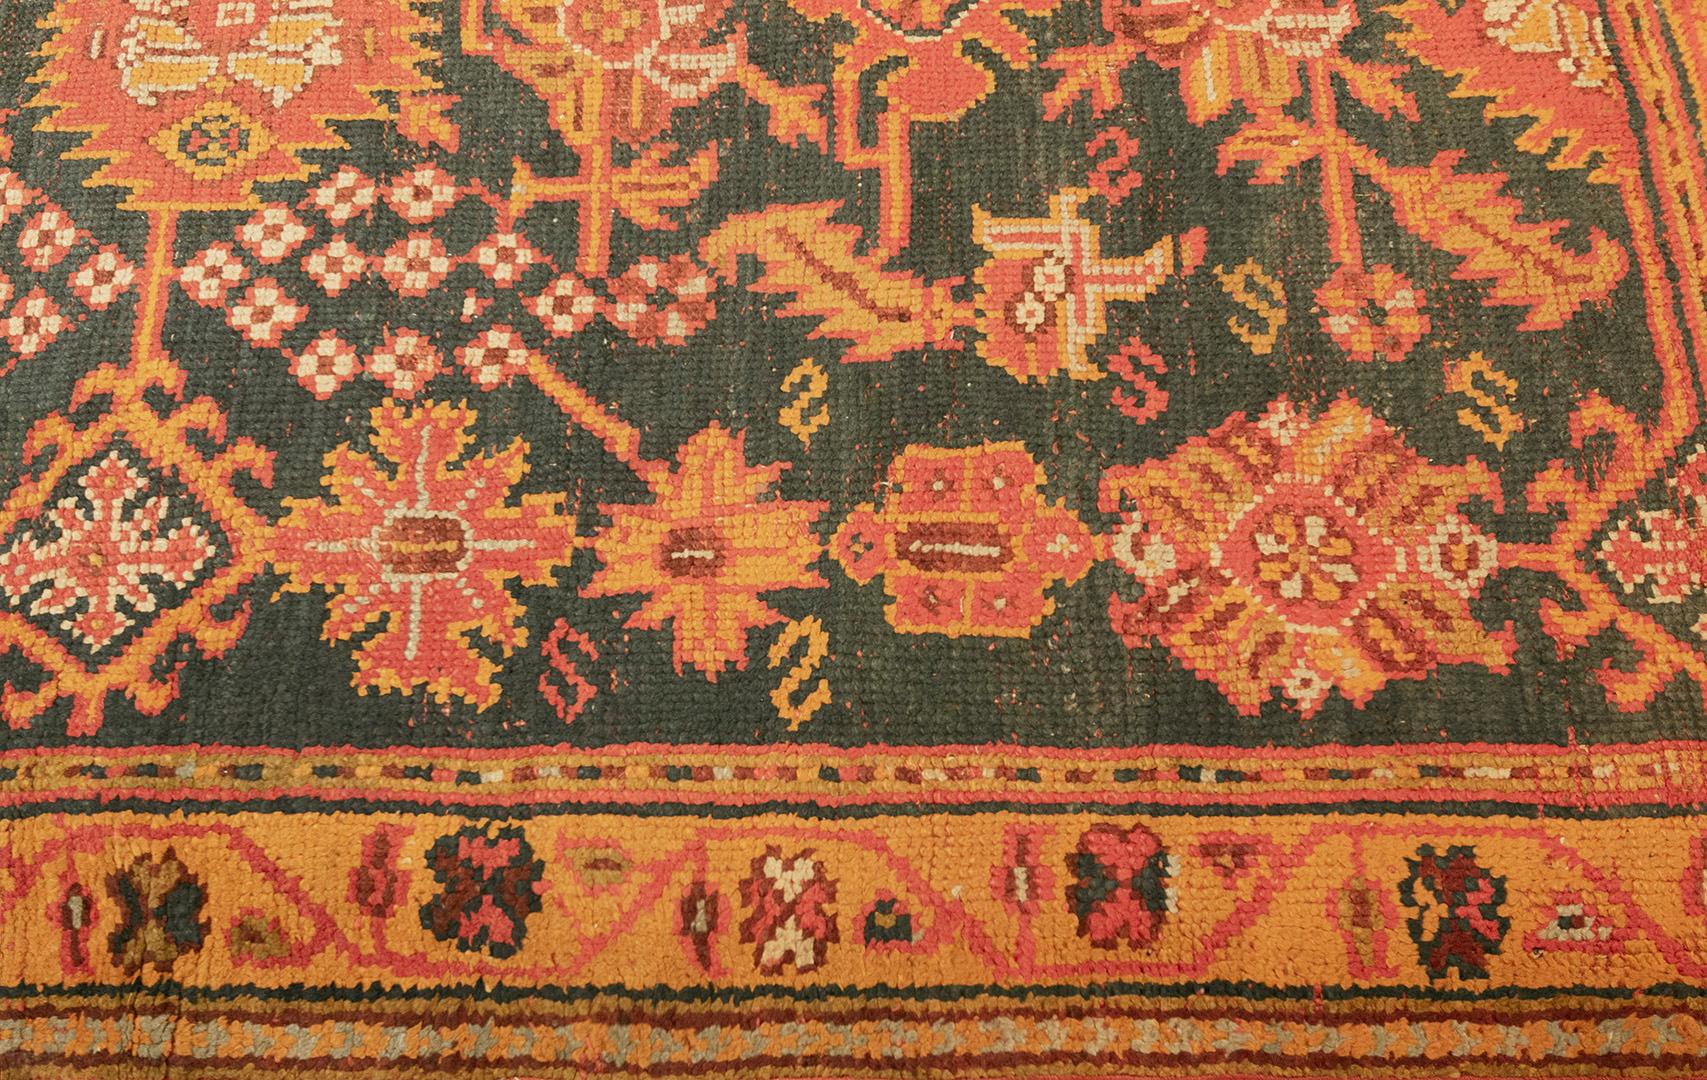 This vibrant traditional handwoven Turkish Oushak rug has an overall deep teal field with serrated palmettes and geometric floral motif linked by angled vines, in an ornate golden floral vine border, between minor geometric stripes.

Oushak (or